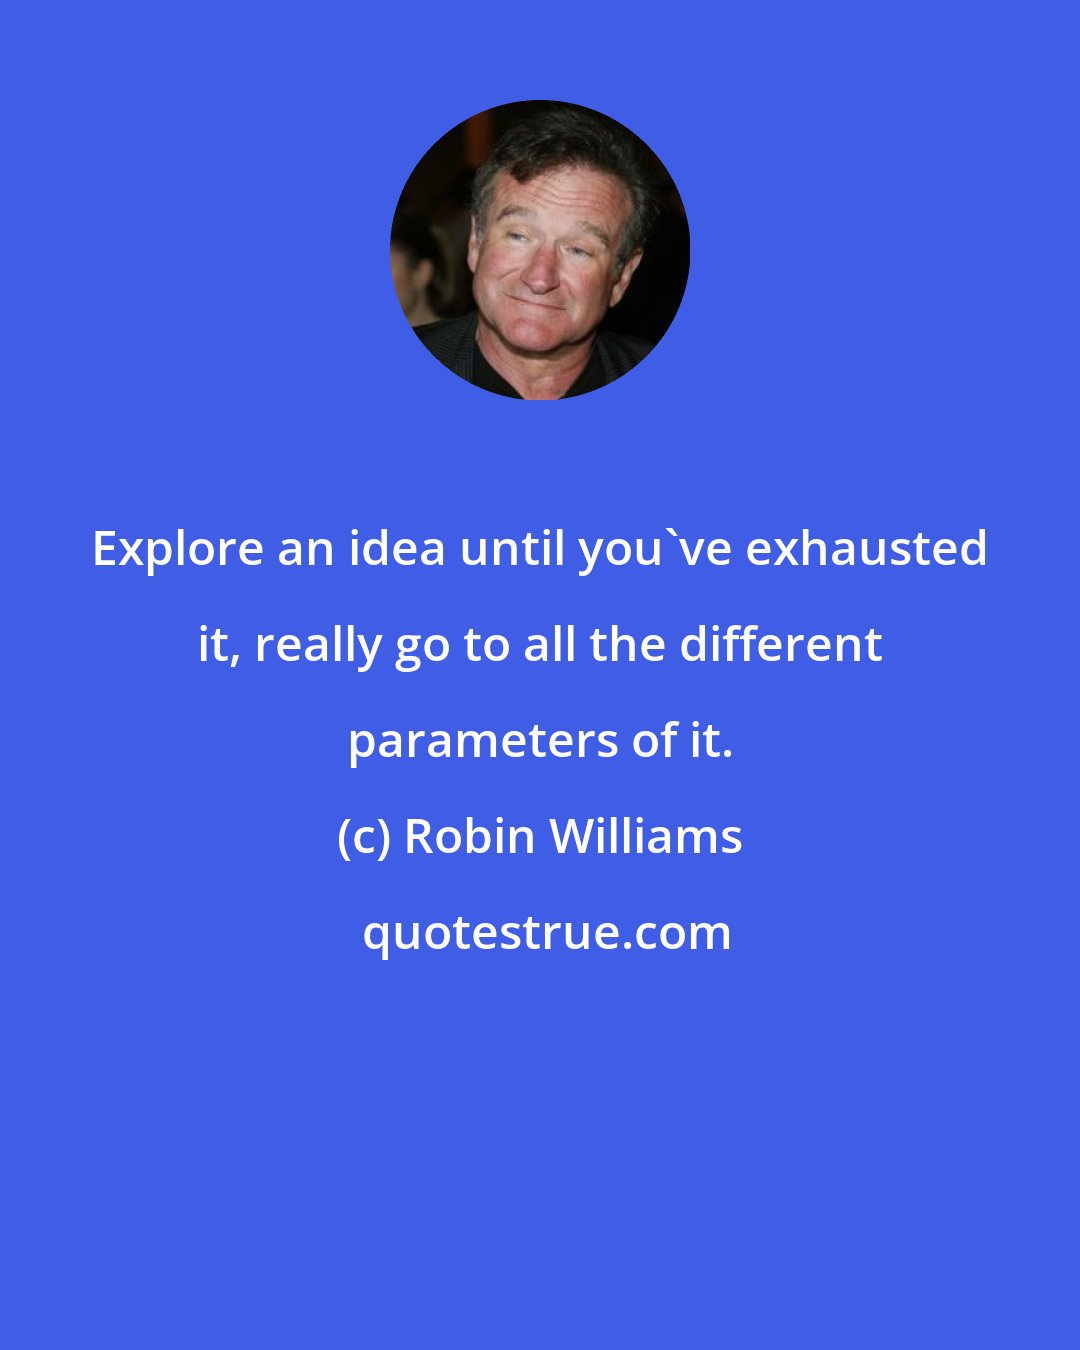 Robin Williams: Explore an idea until you've exhausted it, really go to all the different parameters of it.